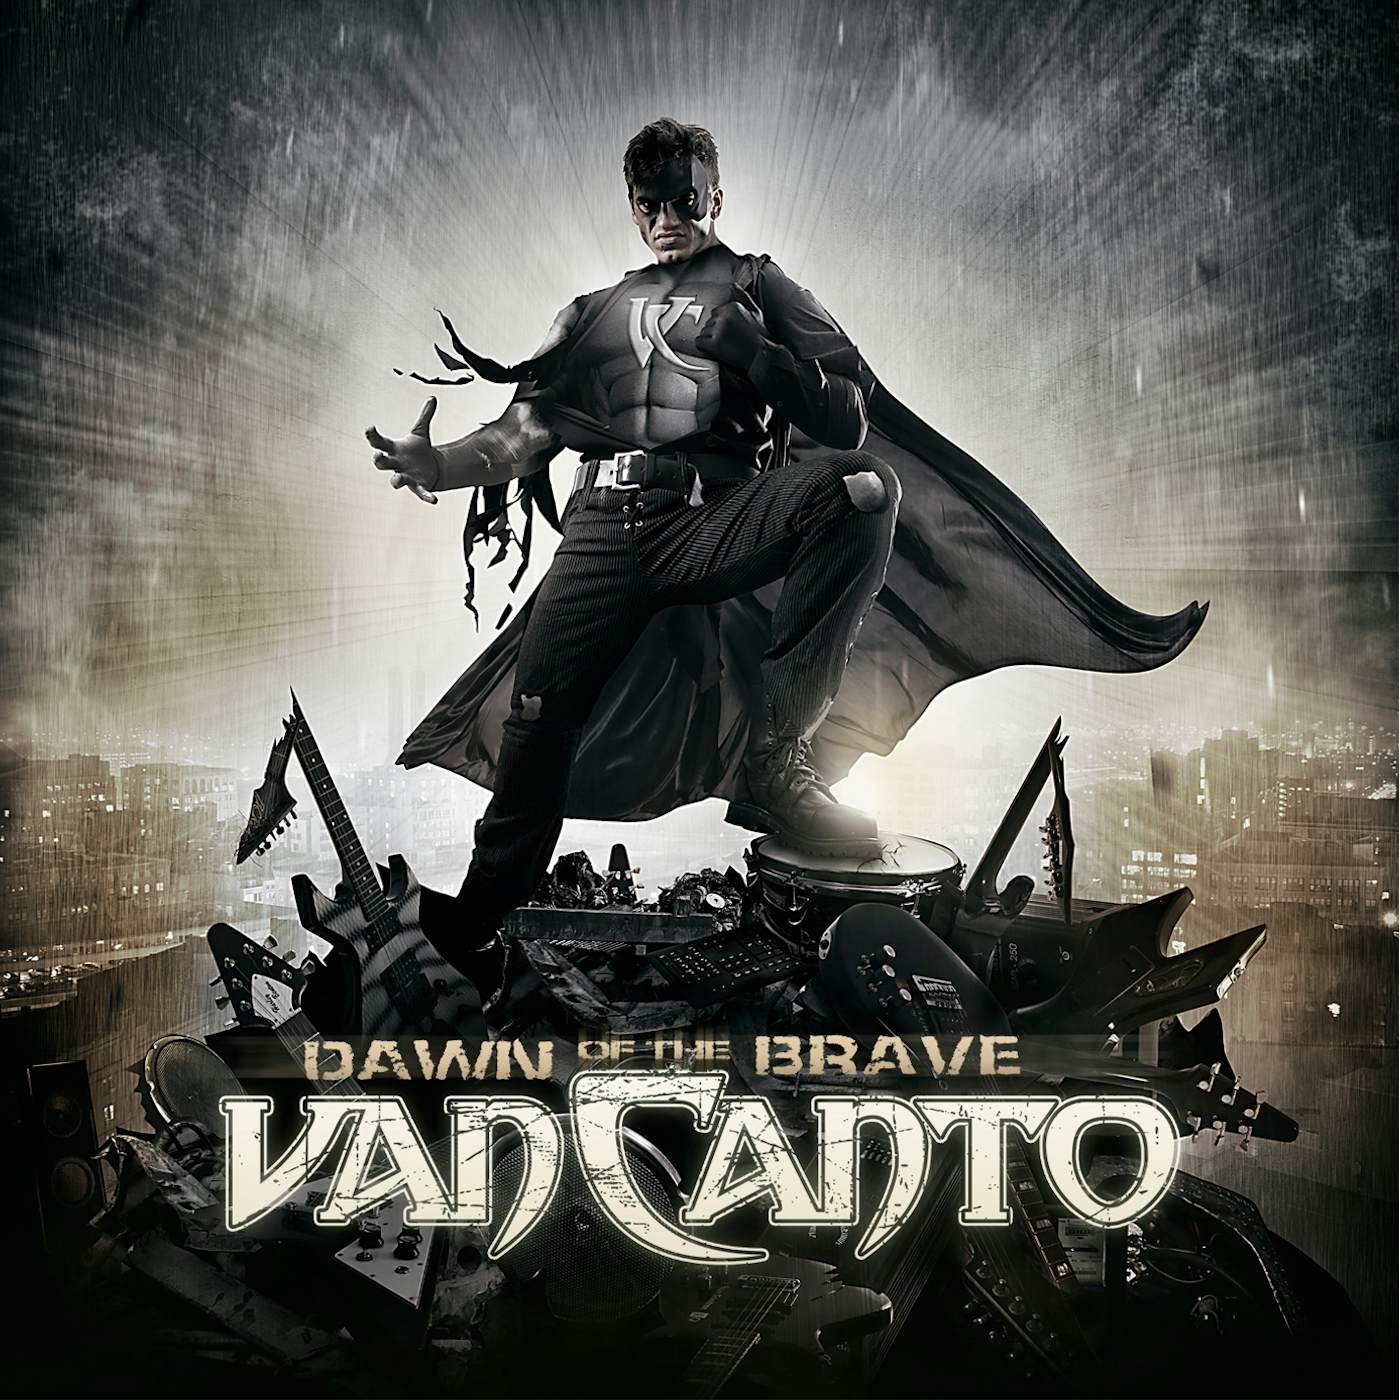 Van Canto DAWN OF THE BRAVE CD